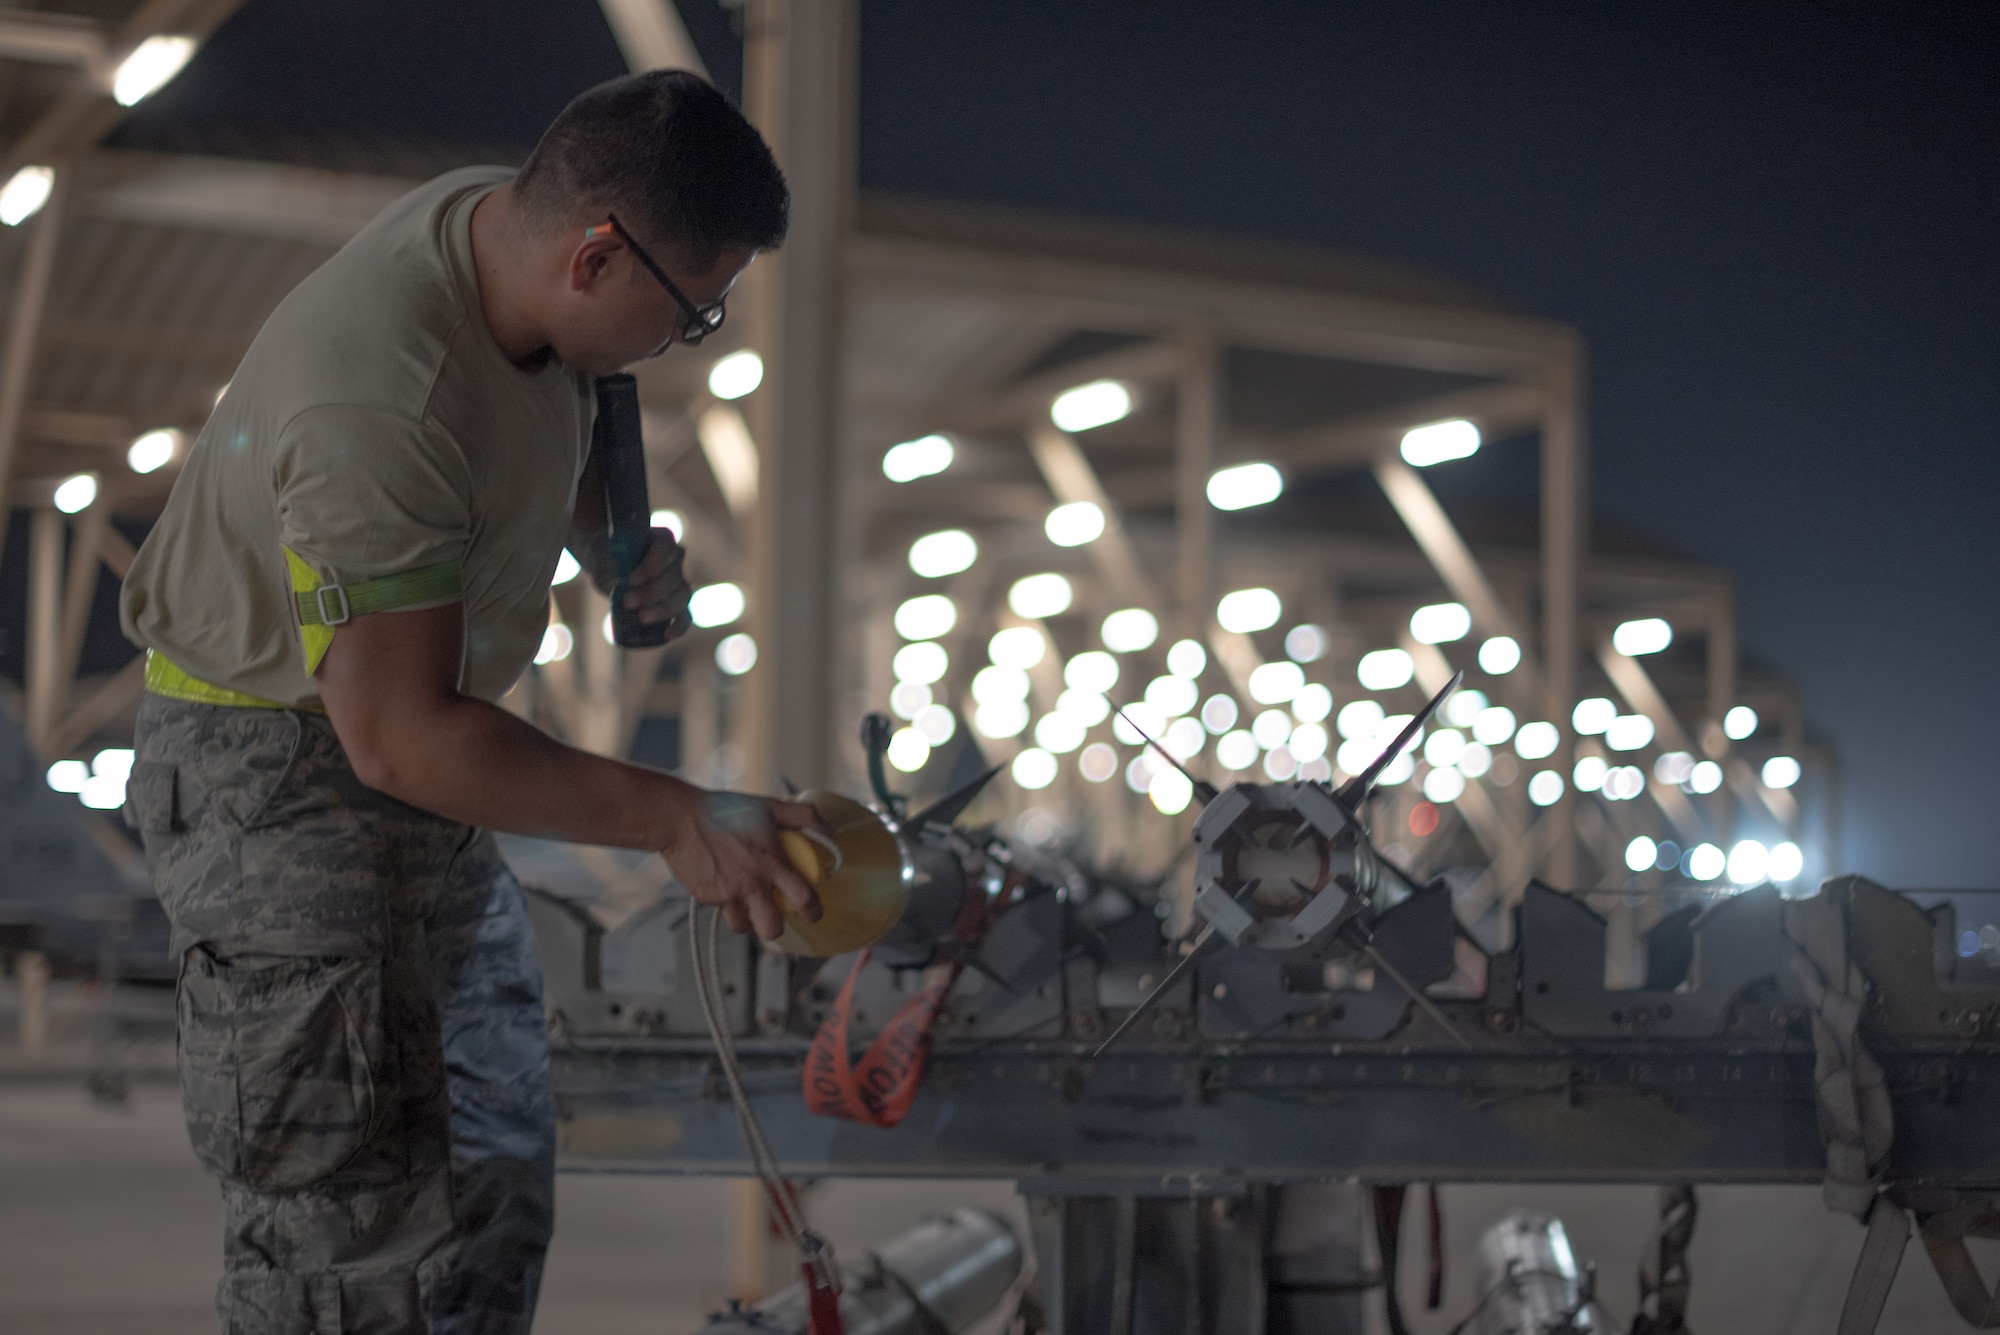 Airman 1st Class Jose Lopez, 380th Expeditionary Aircraft Maintenance Squadron weapons load crew team member, inspects an AIM-9X Sidewinder missile July 15, 2019, at Al Dhafra Air Base, United Arab Emirates. The AIM-9X is an advanced infrared missile and the newest of the Sidewinder family of short-range air-to-air missiles carried on a wide range of fighter jets. (U.S. Air Force photo by Staff Sgt. Chris Thornbury)